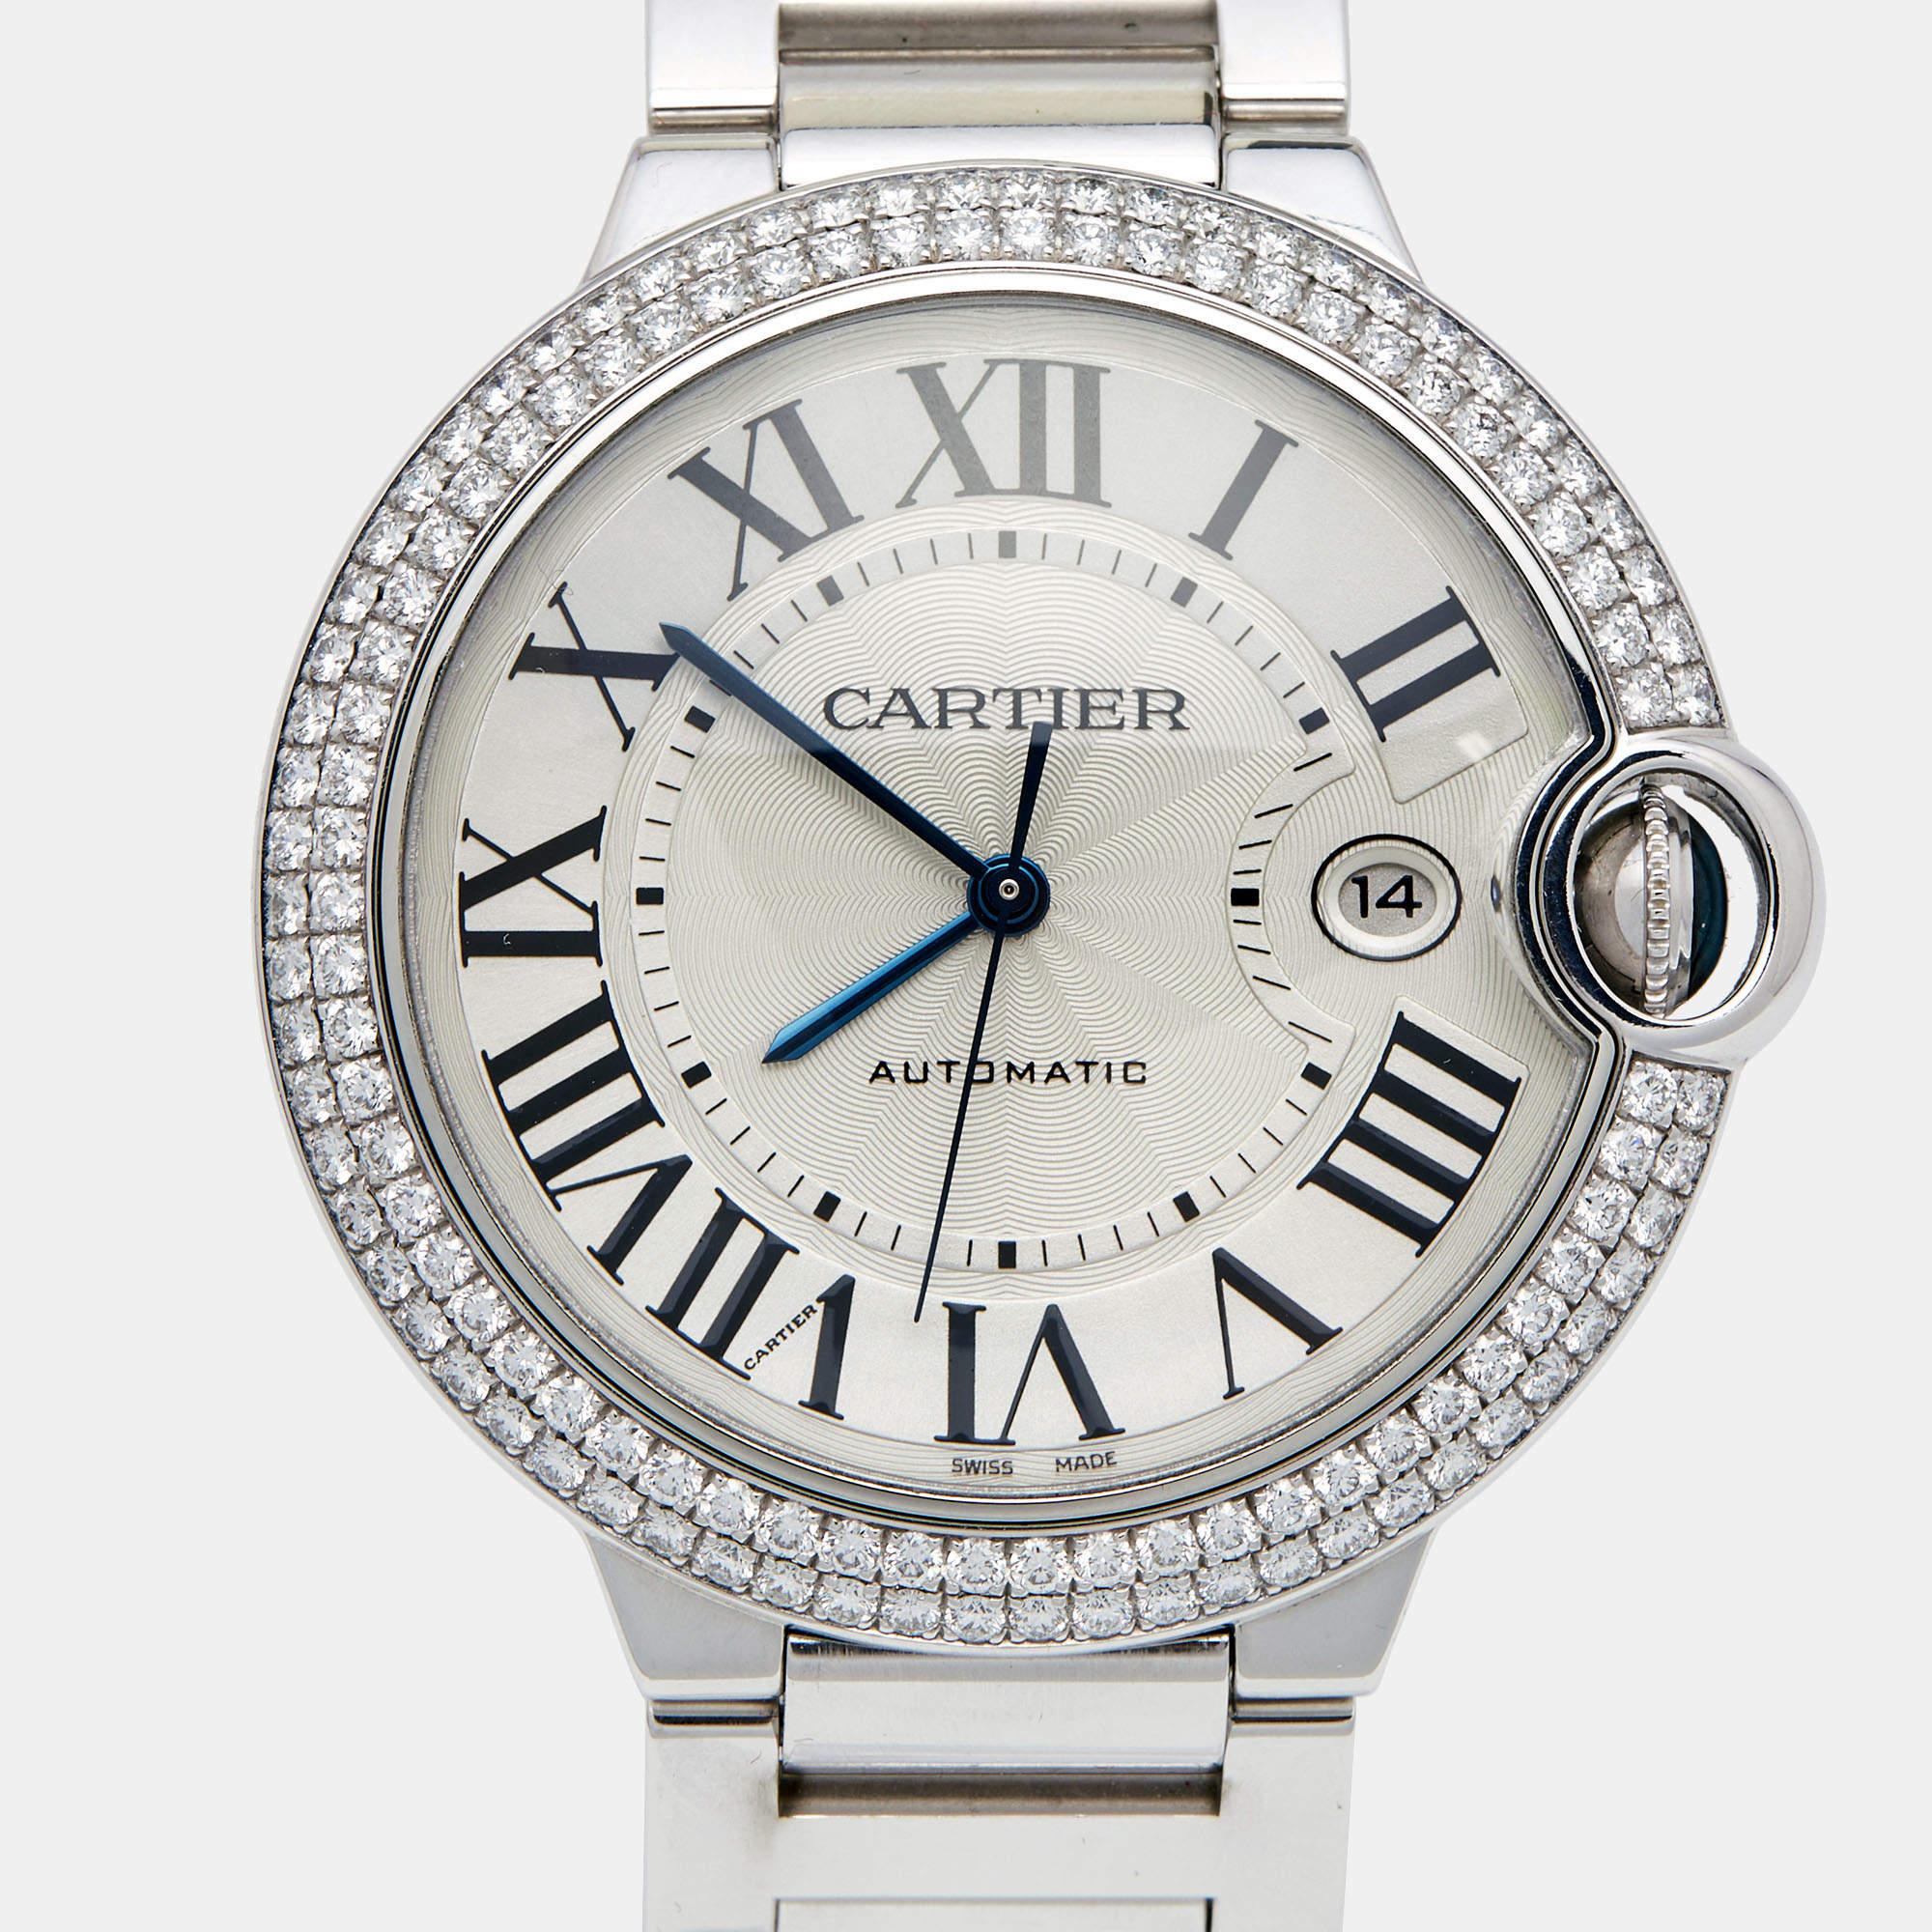 First created in 2007, the Cartier Ballon Bleu watch is a song of details and harmony. The now-iconic watch gets its identity from the guarded blue bubble of the winding crown on the side. The Ballon Bleu WE9009Z3 watch we have here is for men, and